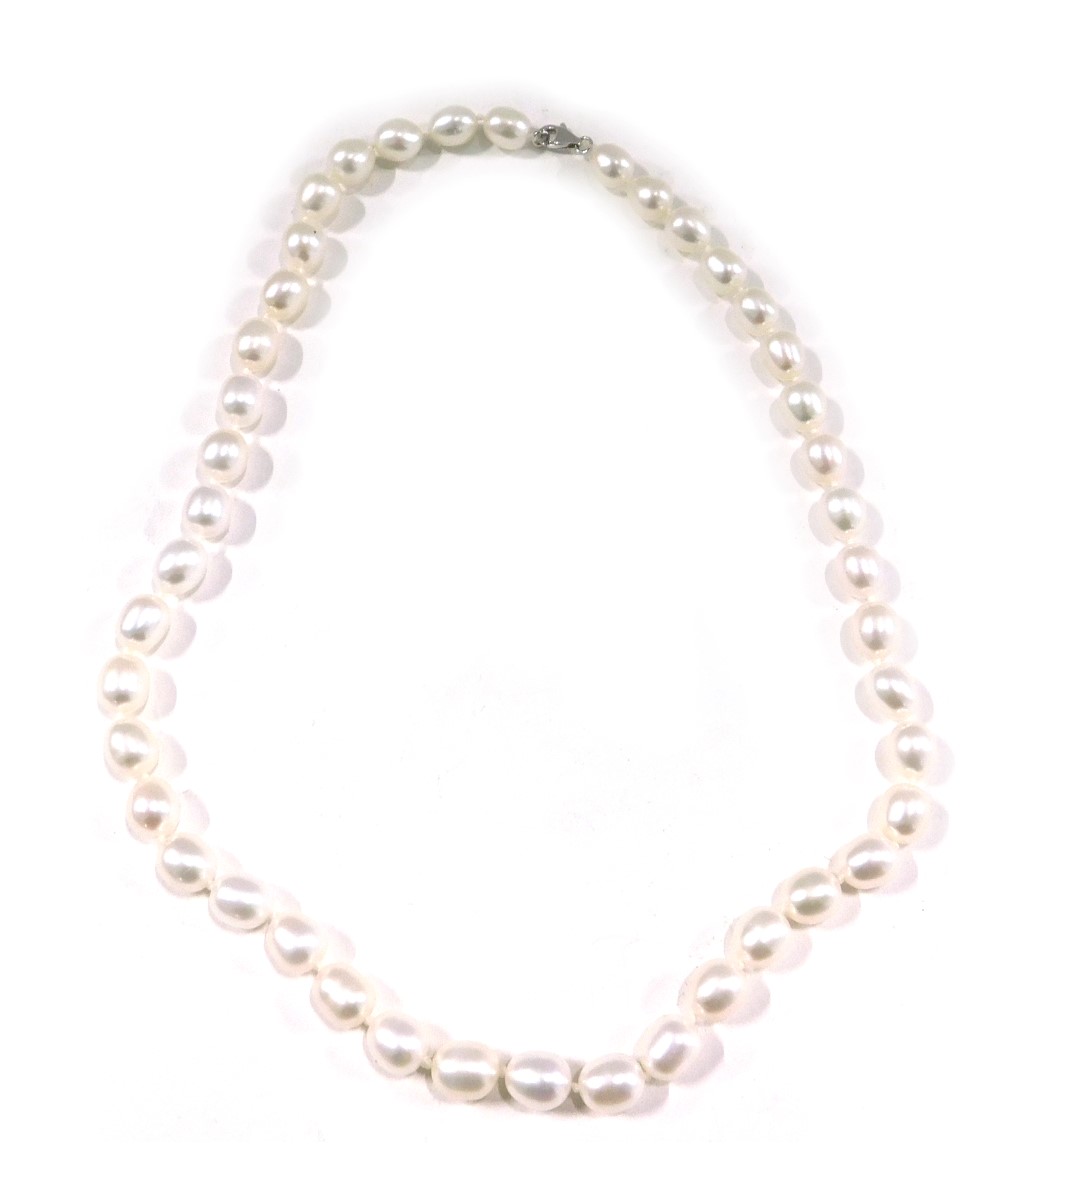 A pearl necklace, with white lustre finish beads, on a knotted string strand, of varying sizes, the